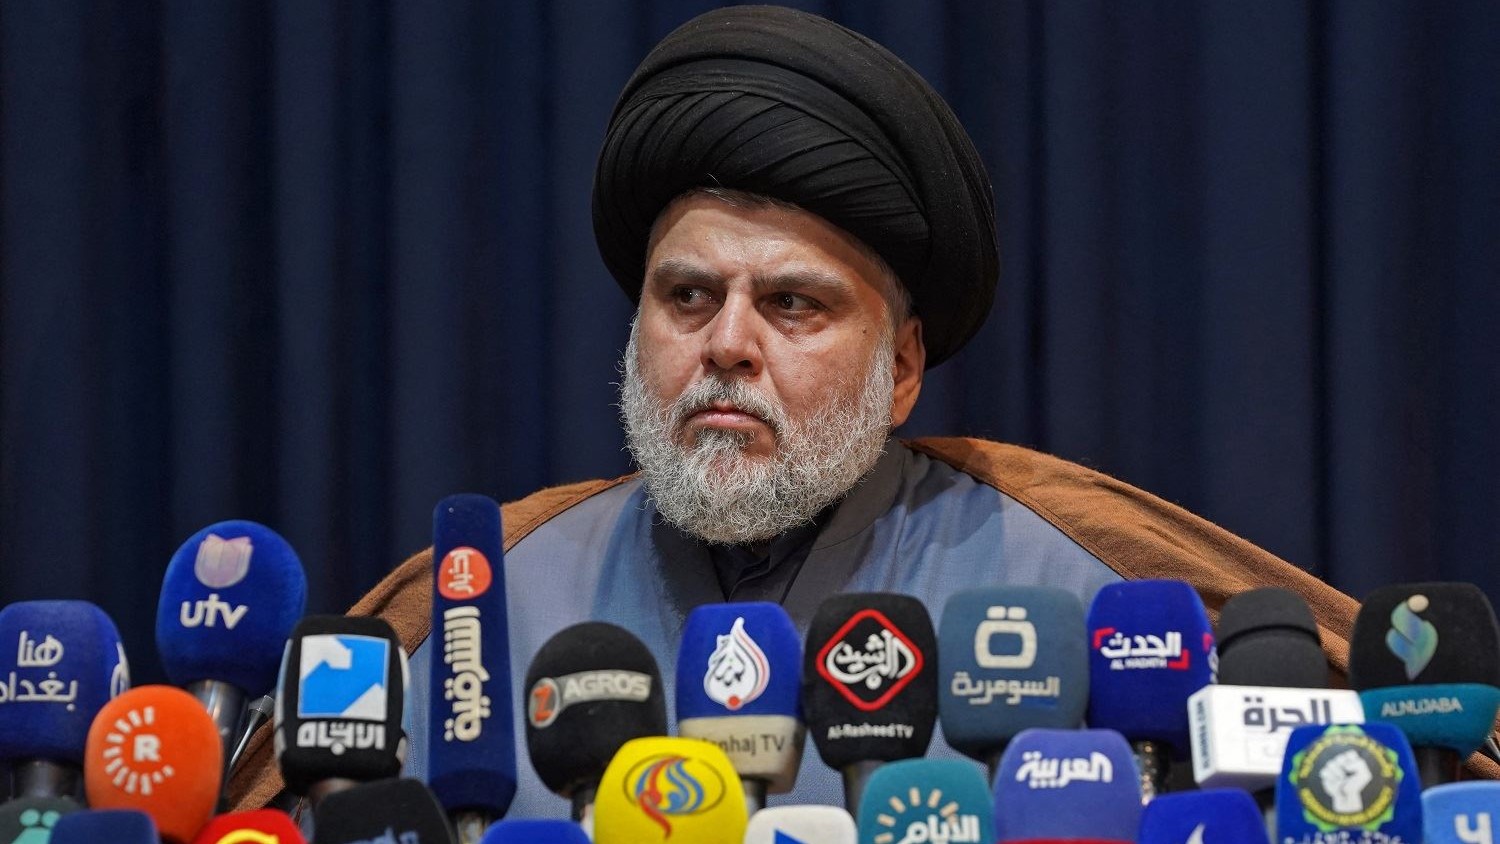 Al-Sadrs minister attacks the coordinating framework for holding a parliament session and makes an appeal to Iran